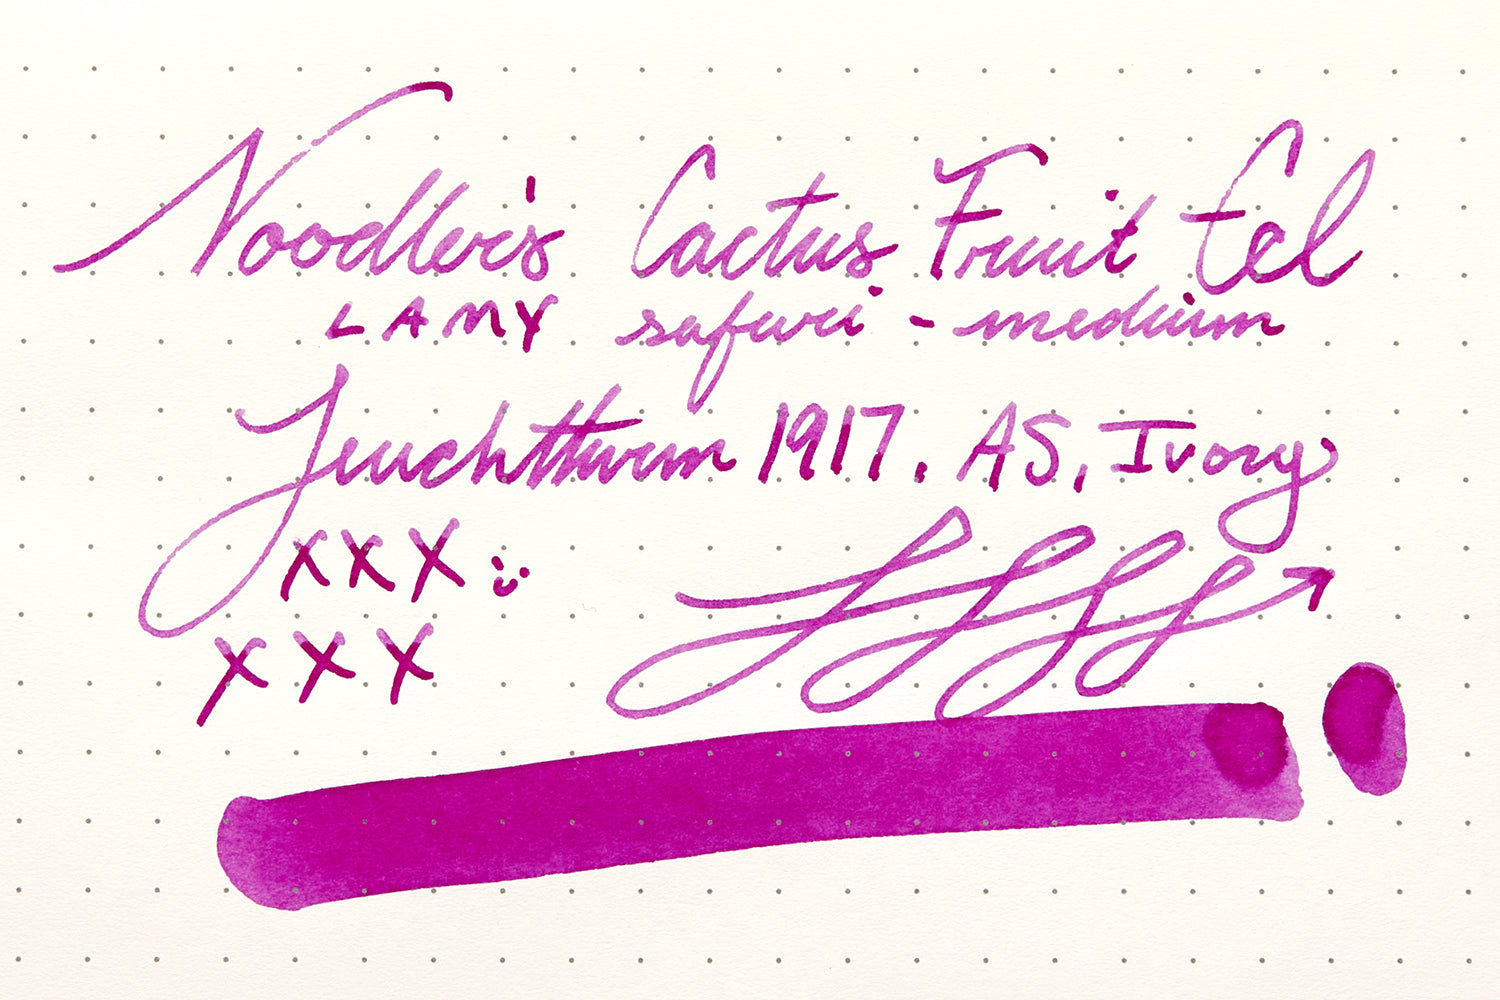 Noodler's Cactus Fruit Eel fountain pen ink writing sample on cream colored dot grid paper